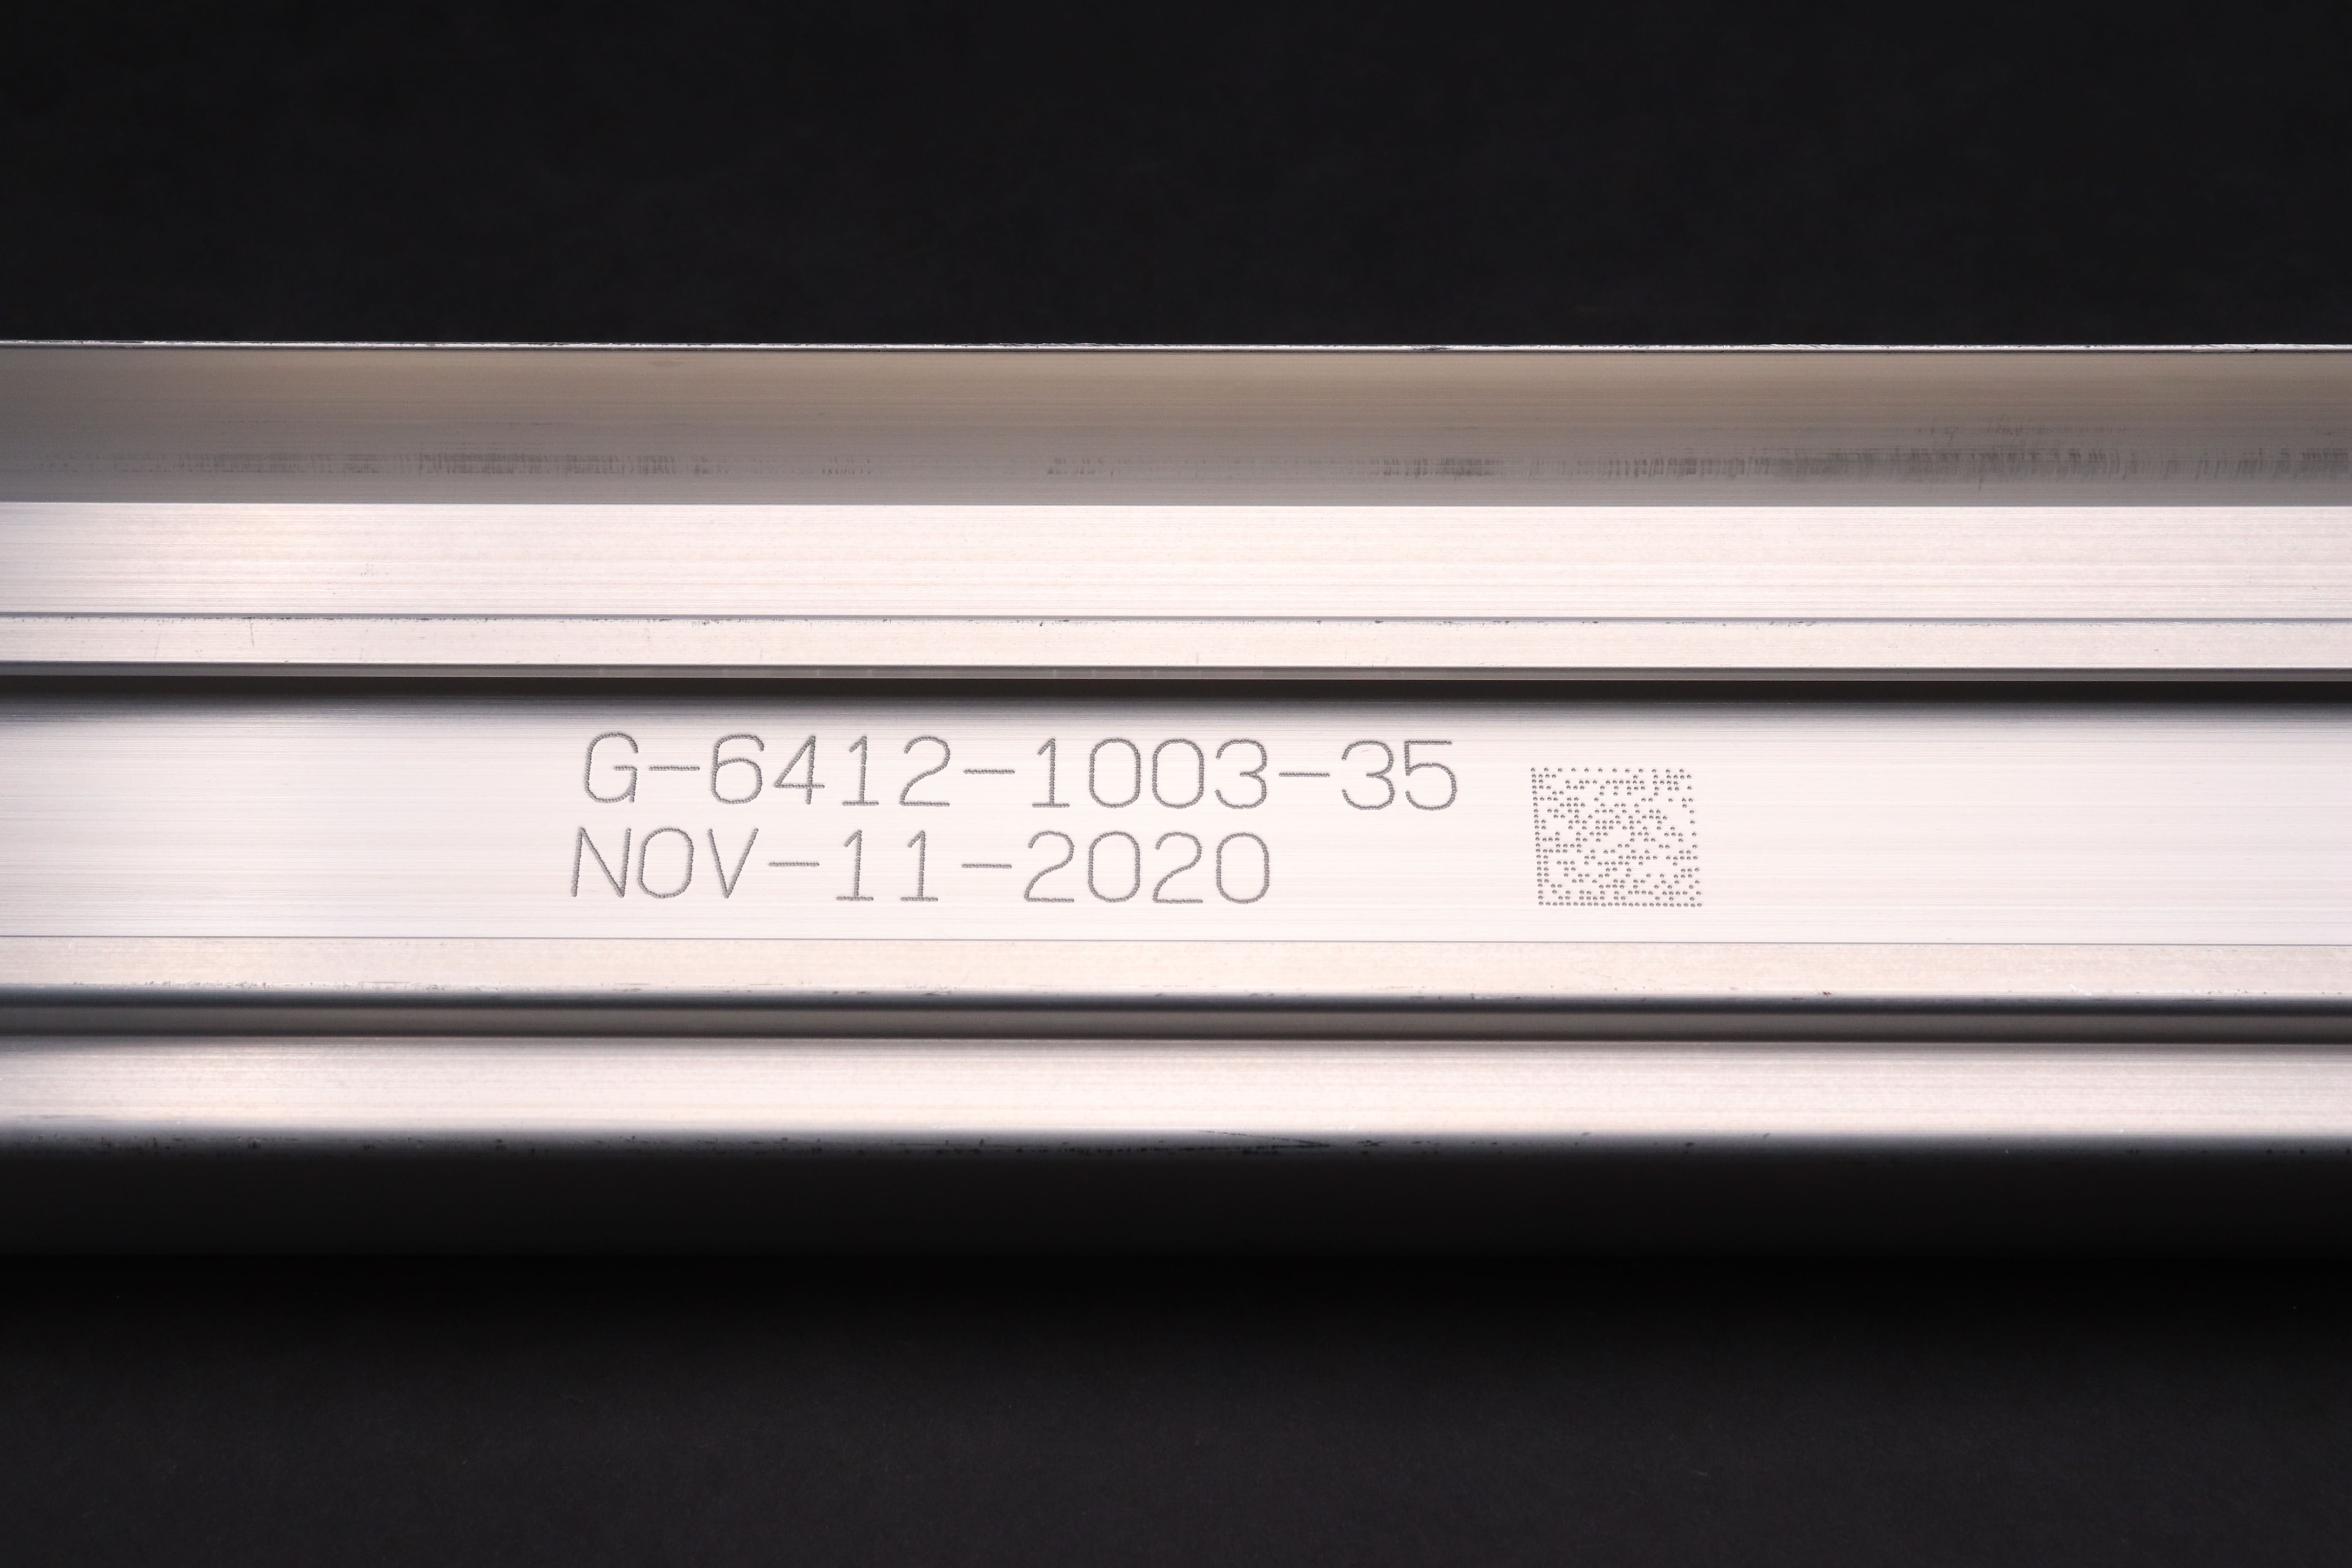 Image of an aluminum profile engraved with text, numbers, and a QR code that reads 'G-6412-1003-35 NOV-11-2020'.